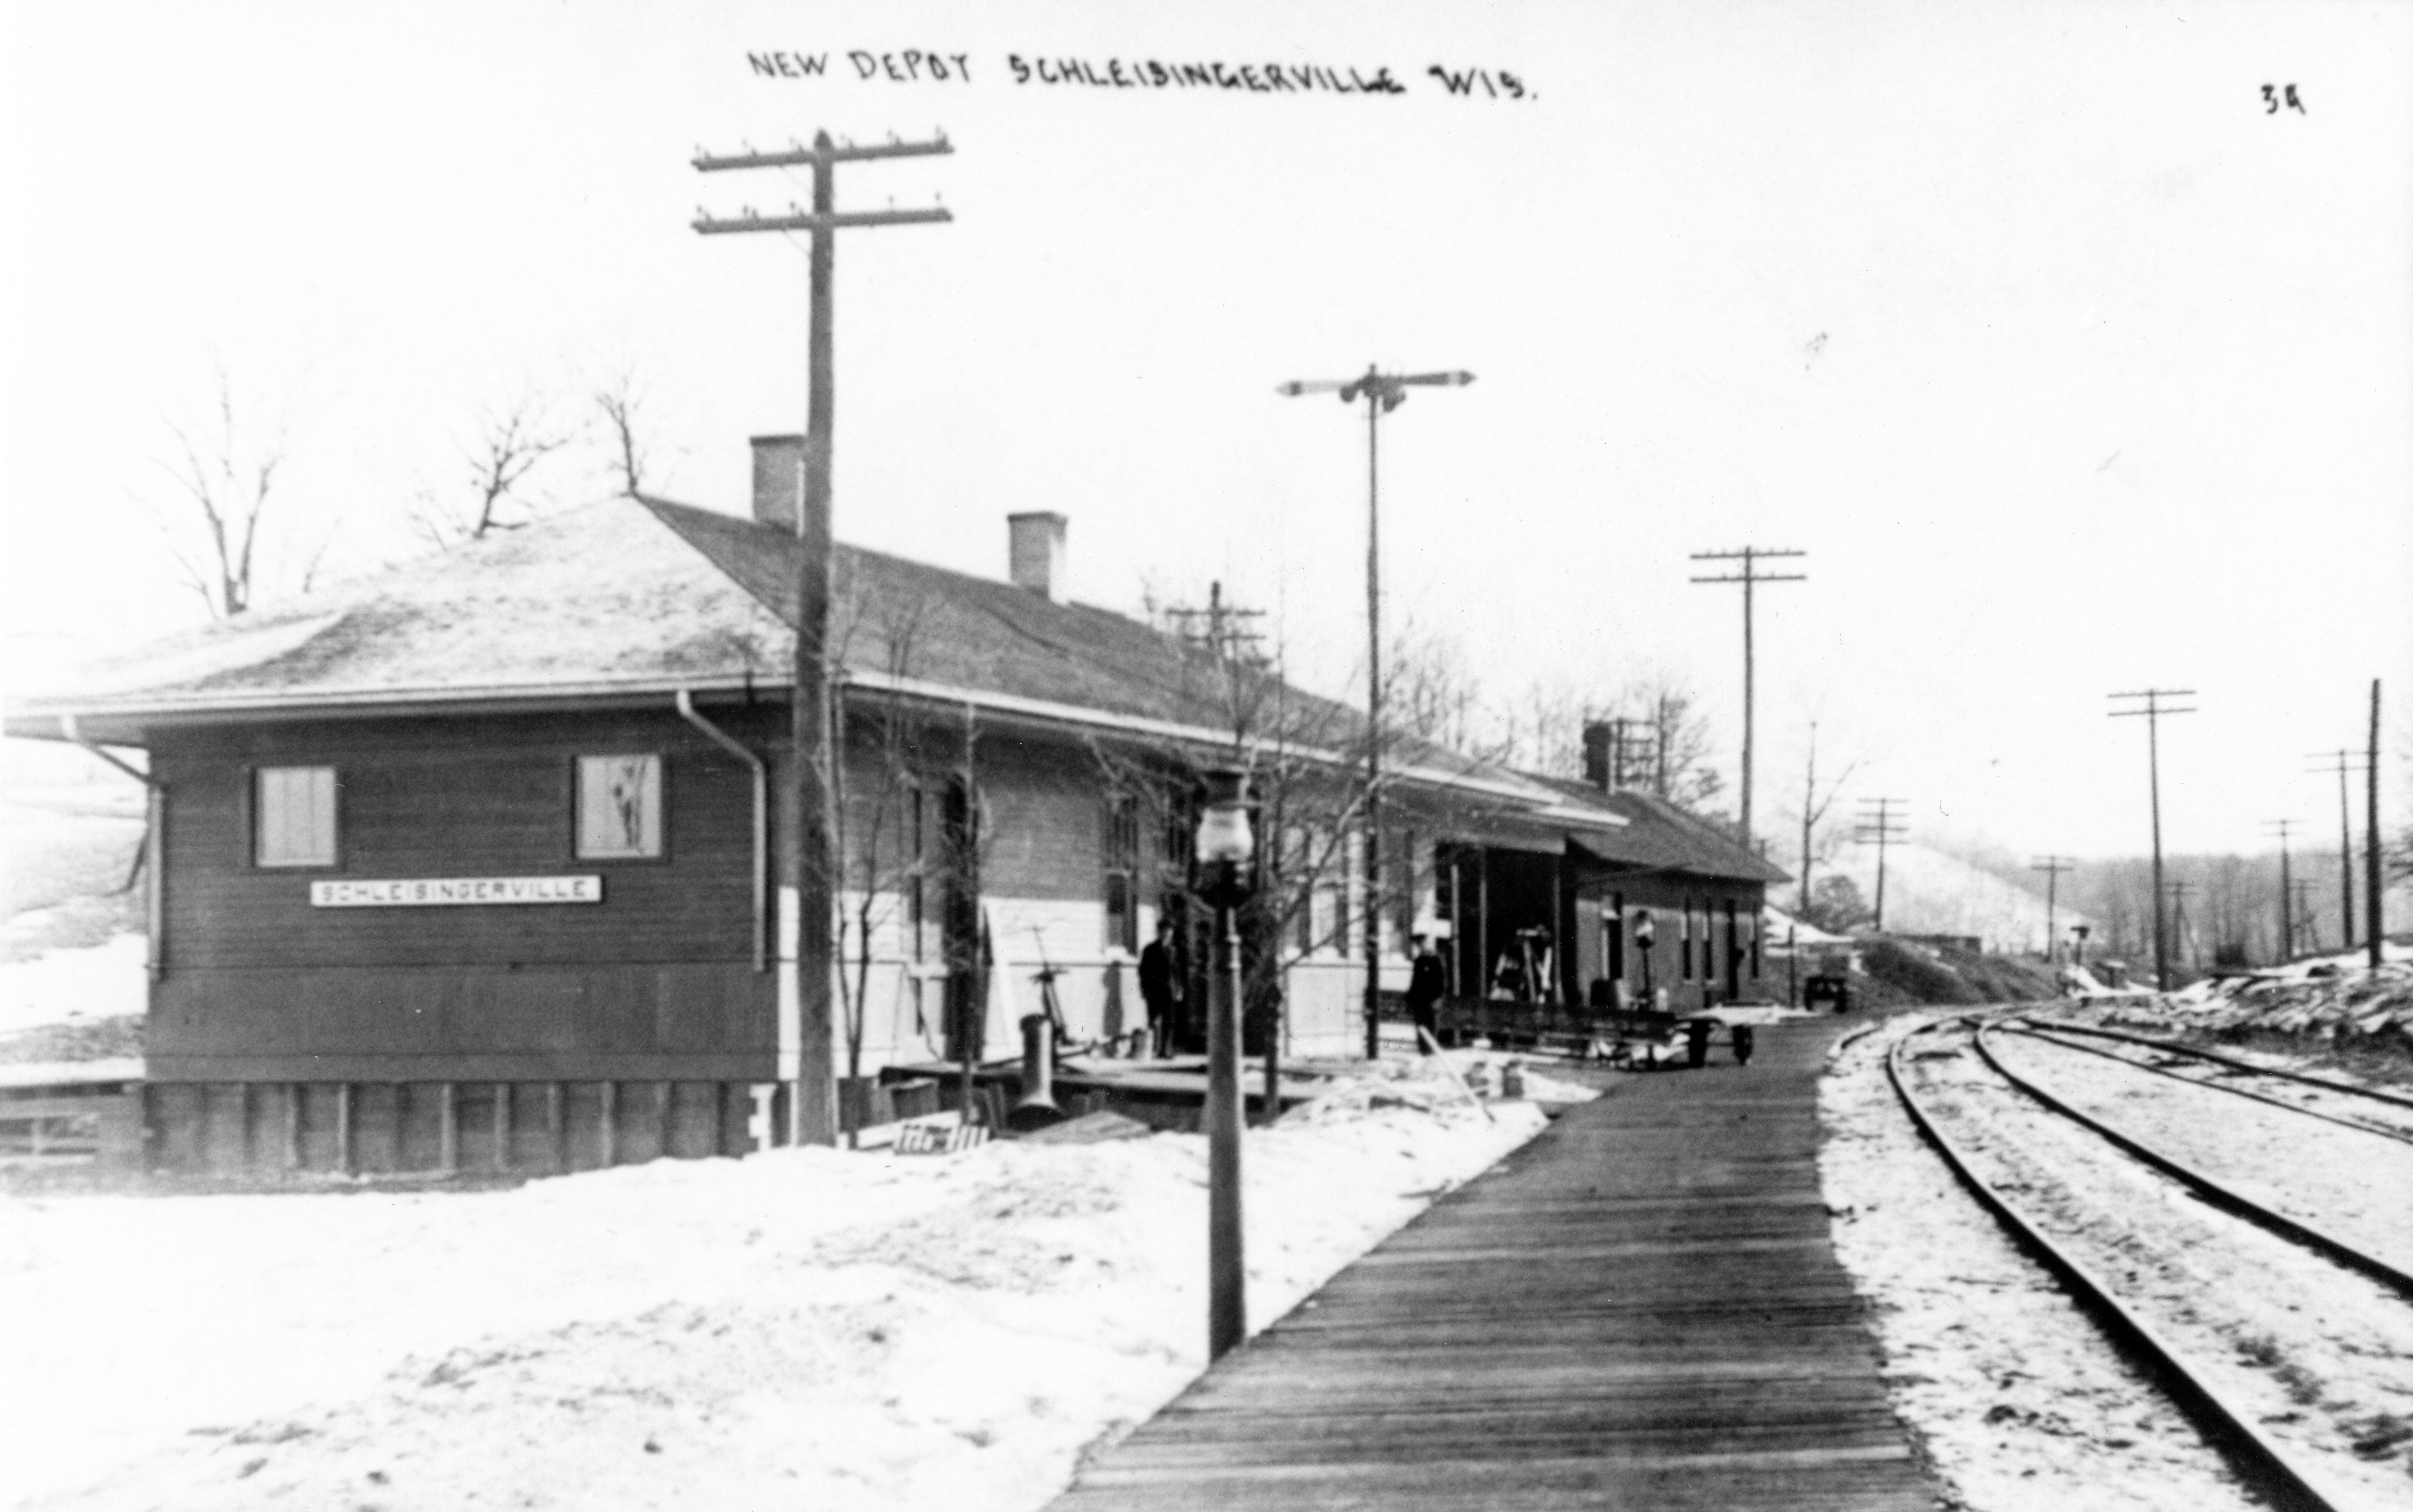 Old and New Depot together in 1912